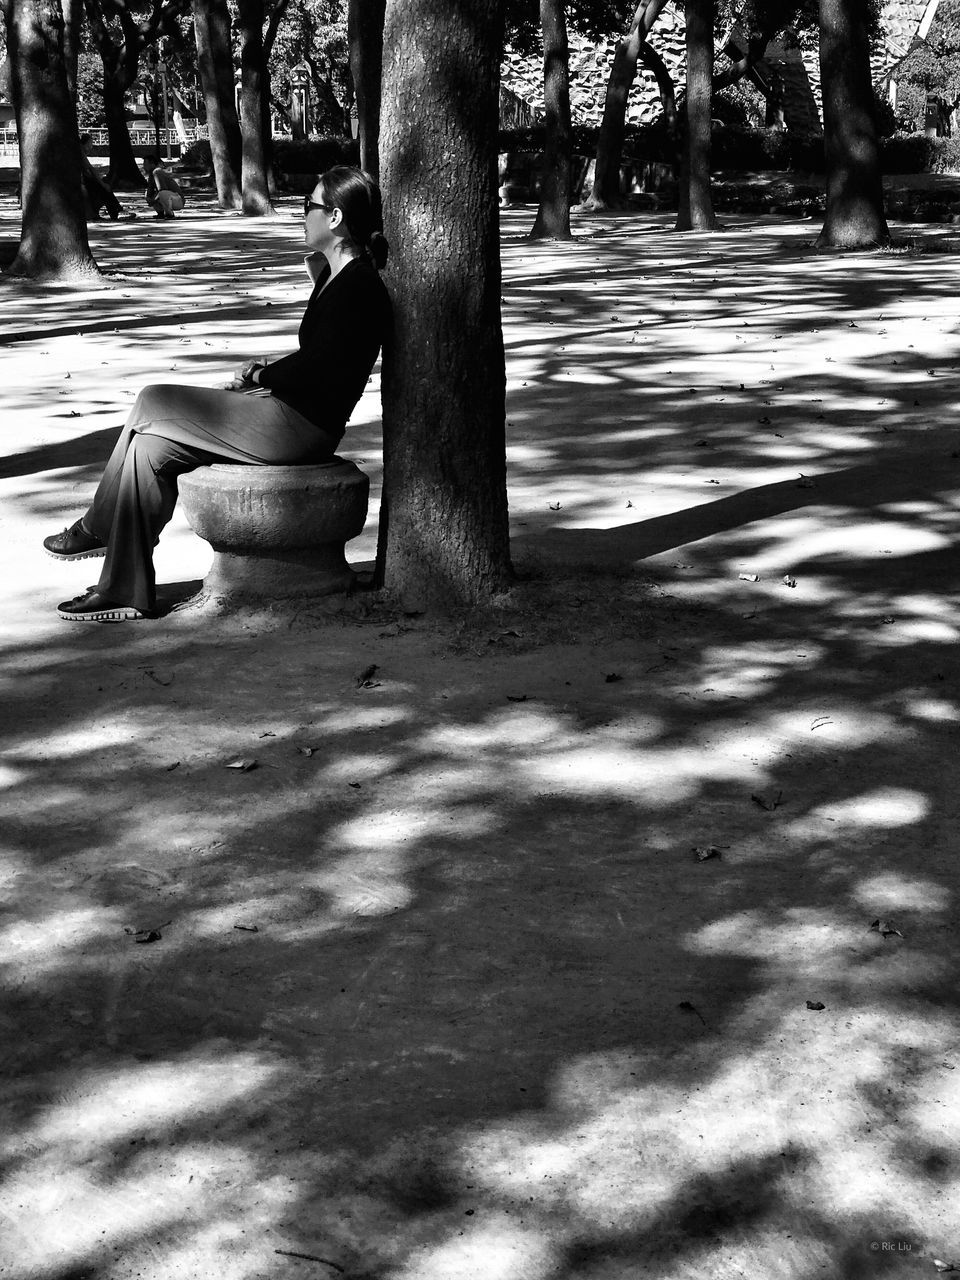 real people, shadow, men, street, lifestyles, outdoors, sitting, one person, day, tree, nature, people, adult